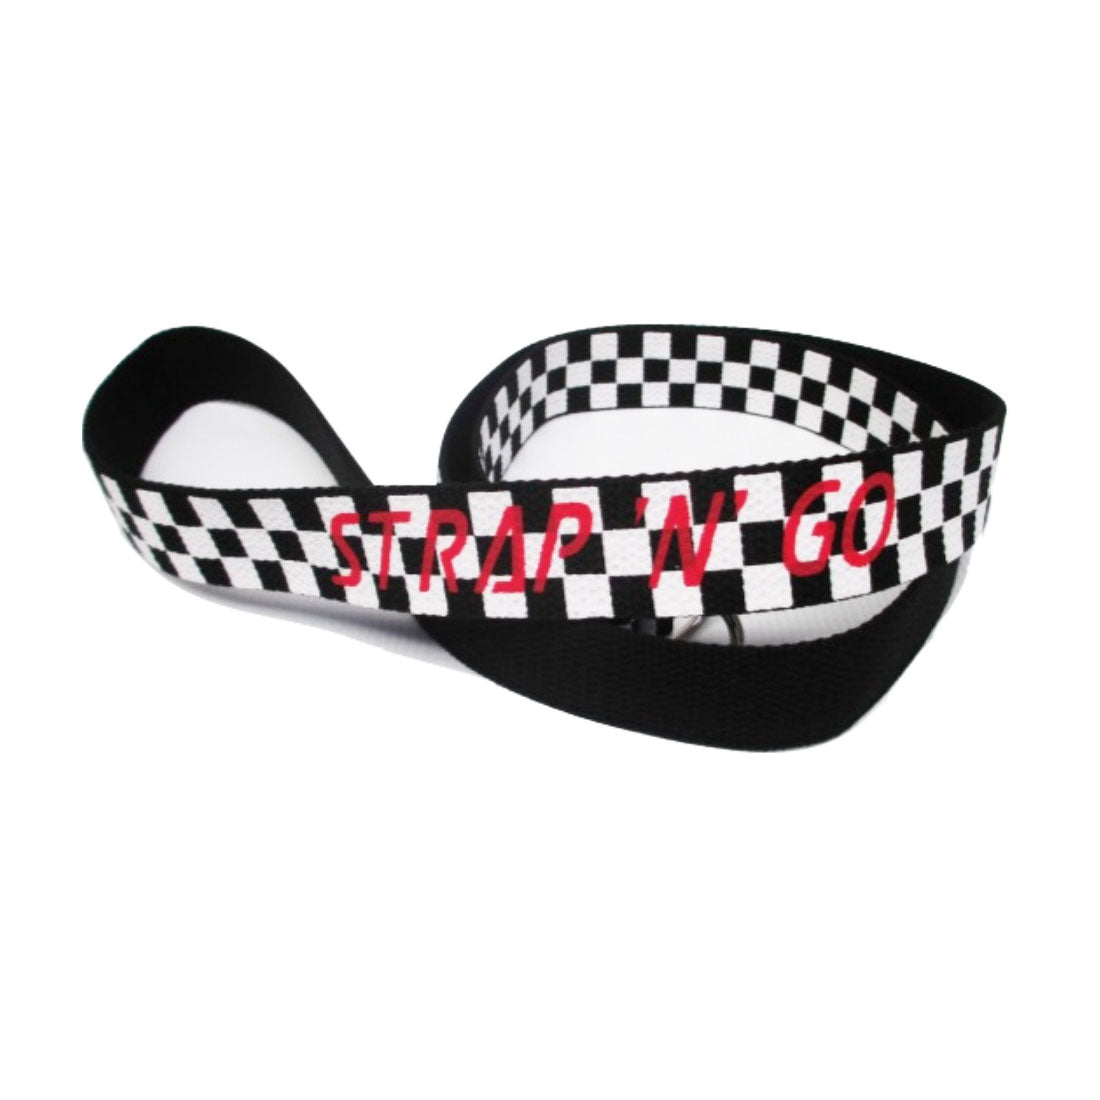 Strap N Go Skate Noose/Leash - Patterns Checkers Roller Skate Accessories